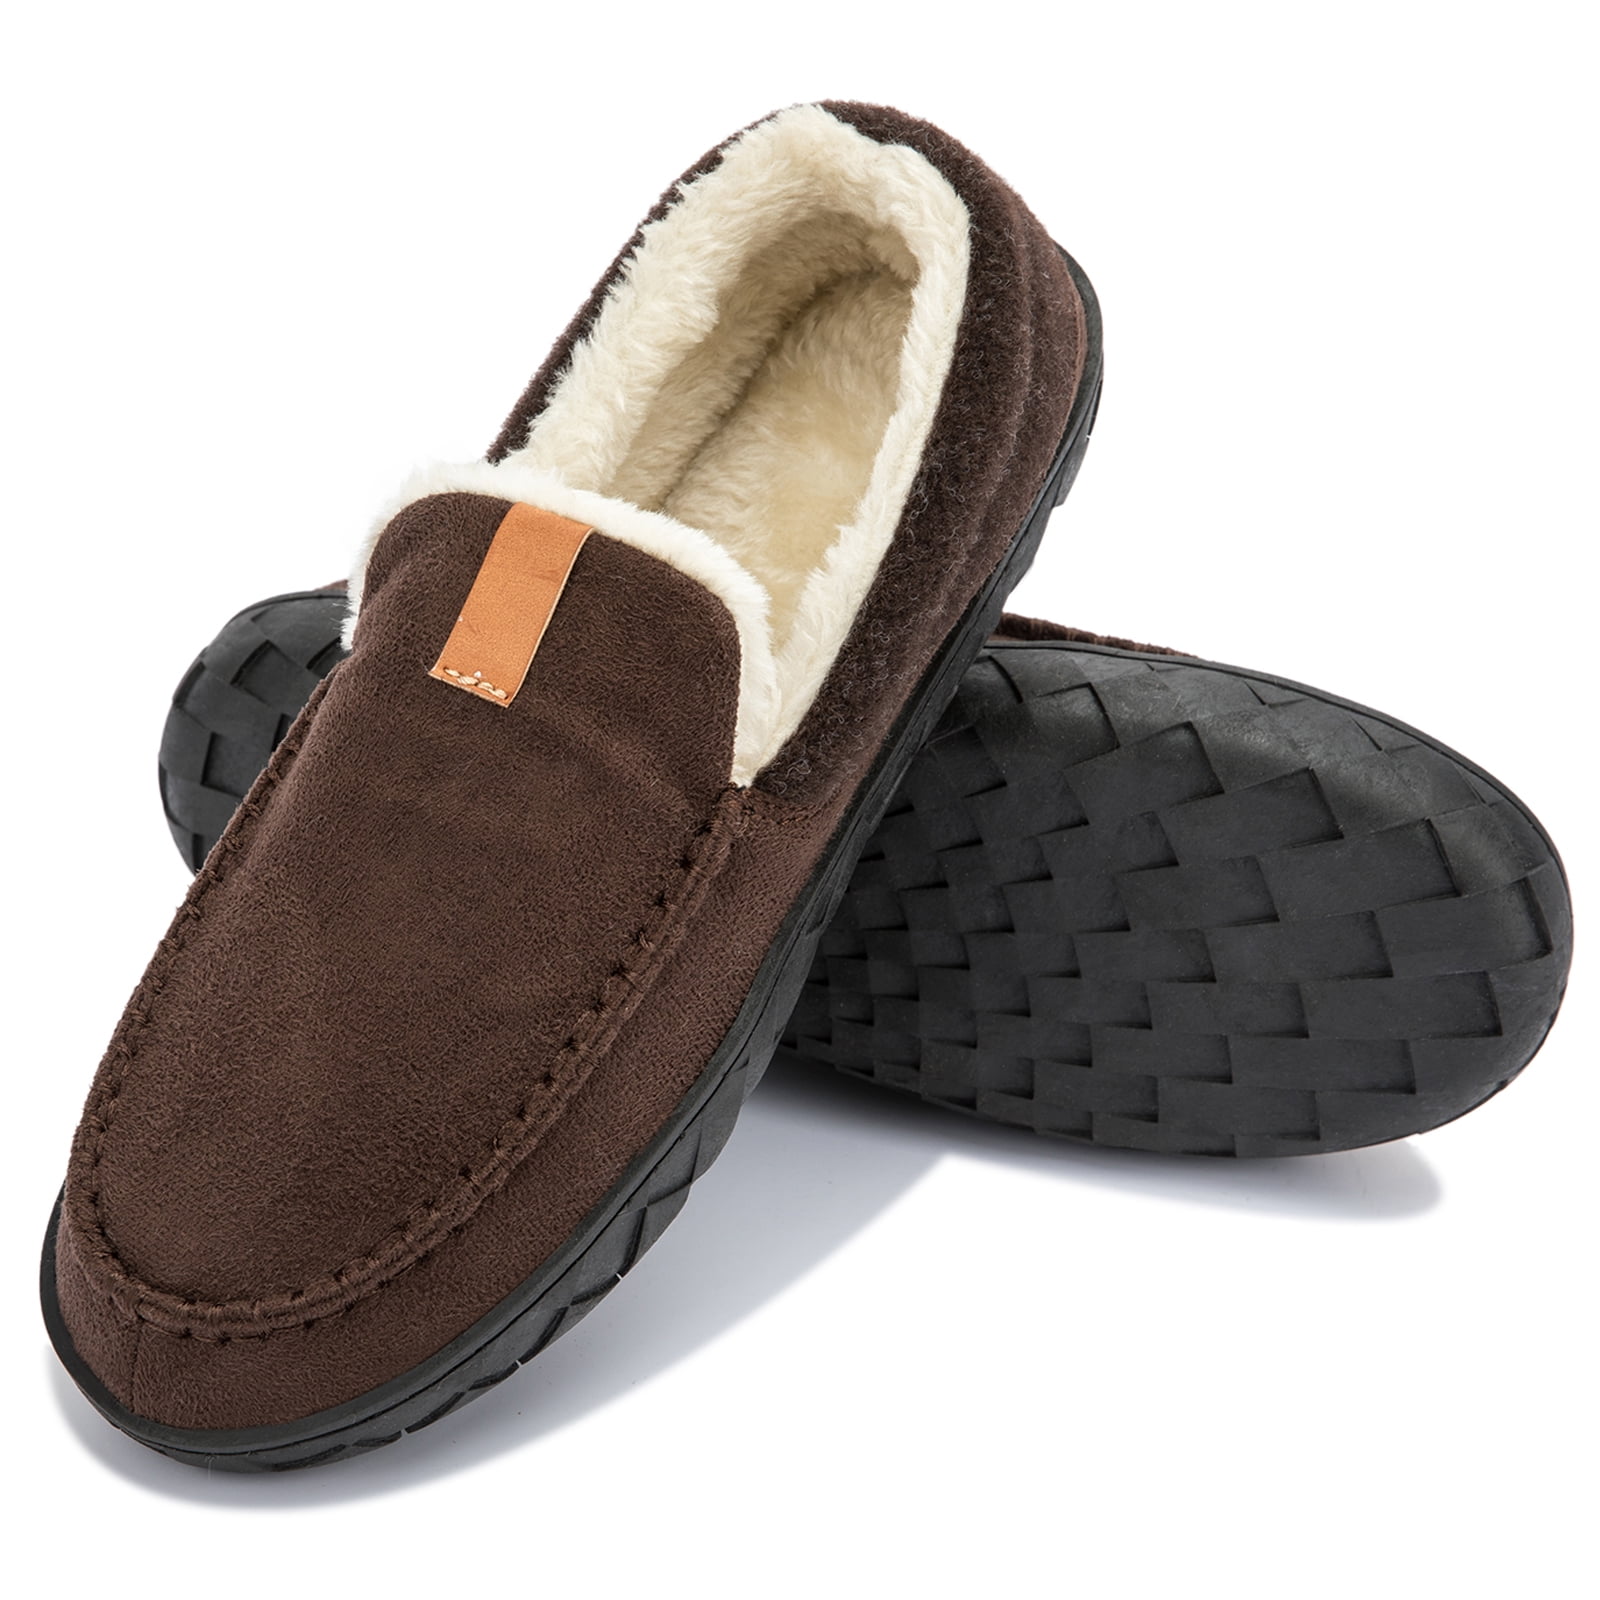 WOTTE Mens Slippers Cozy Fuzzy Plaid Moccian House Shoe with Memory ...